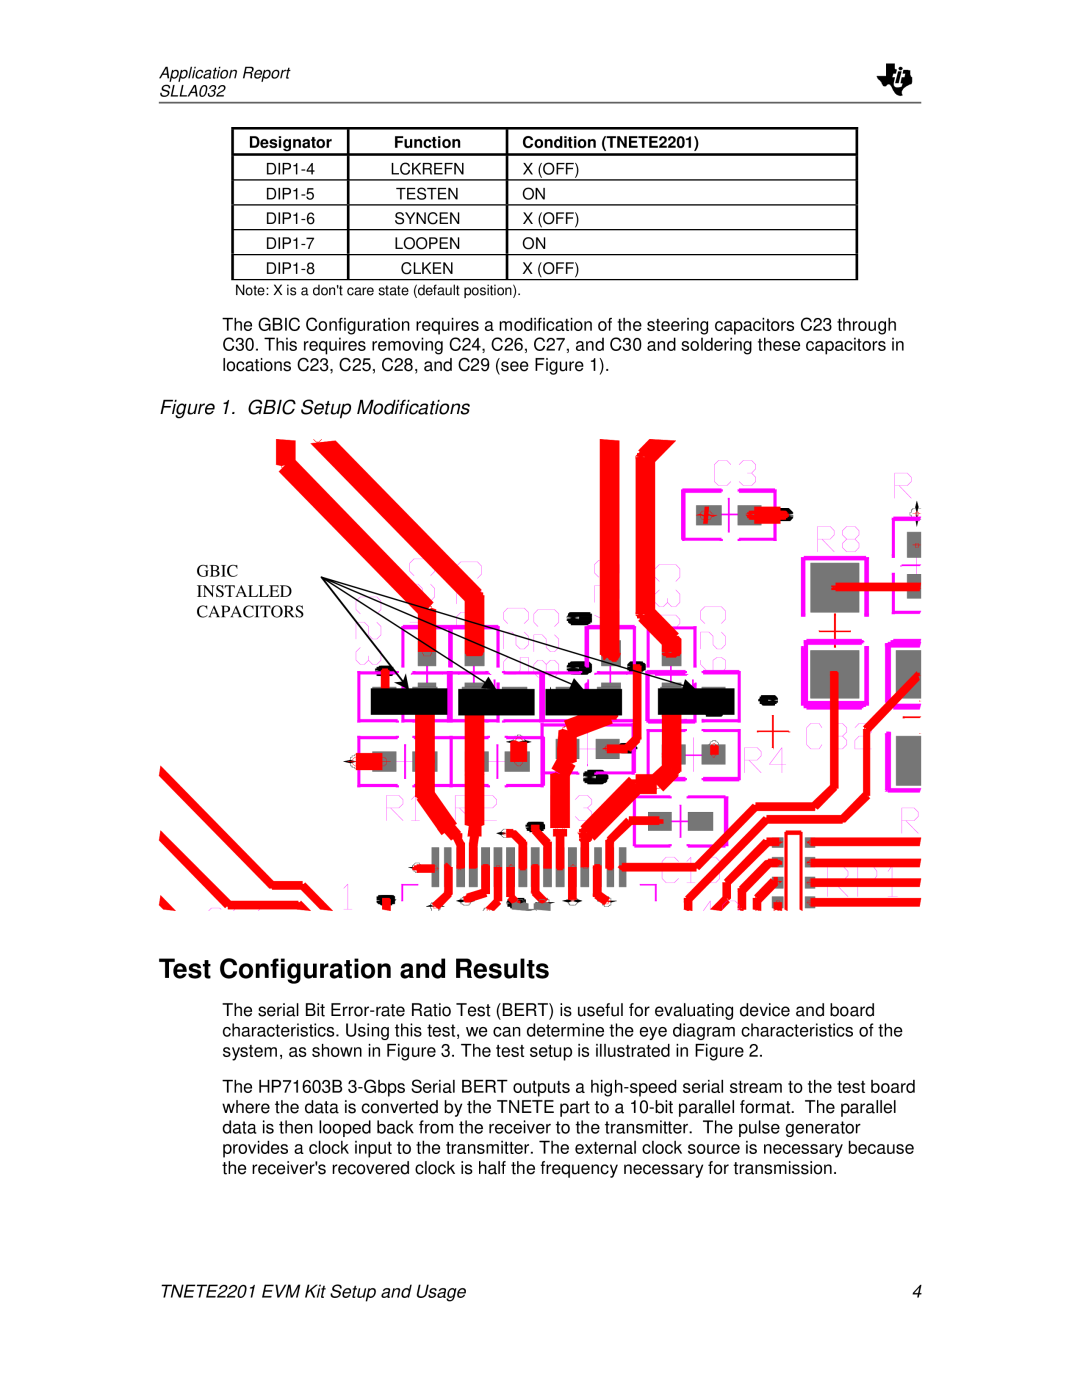 Texas Instruments TNETE2201 manual Test Configuration and Results, GBIC Setup Modifications 